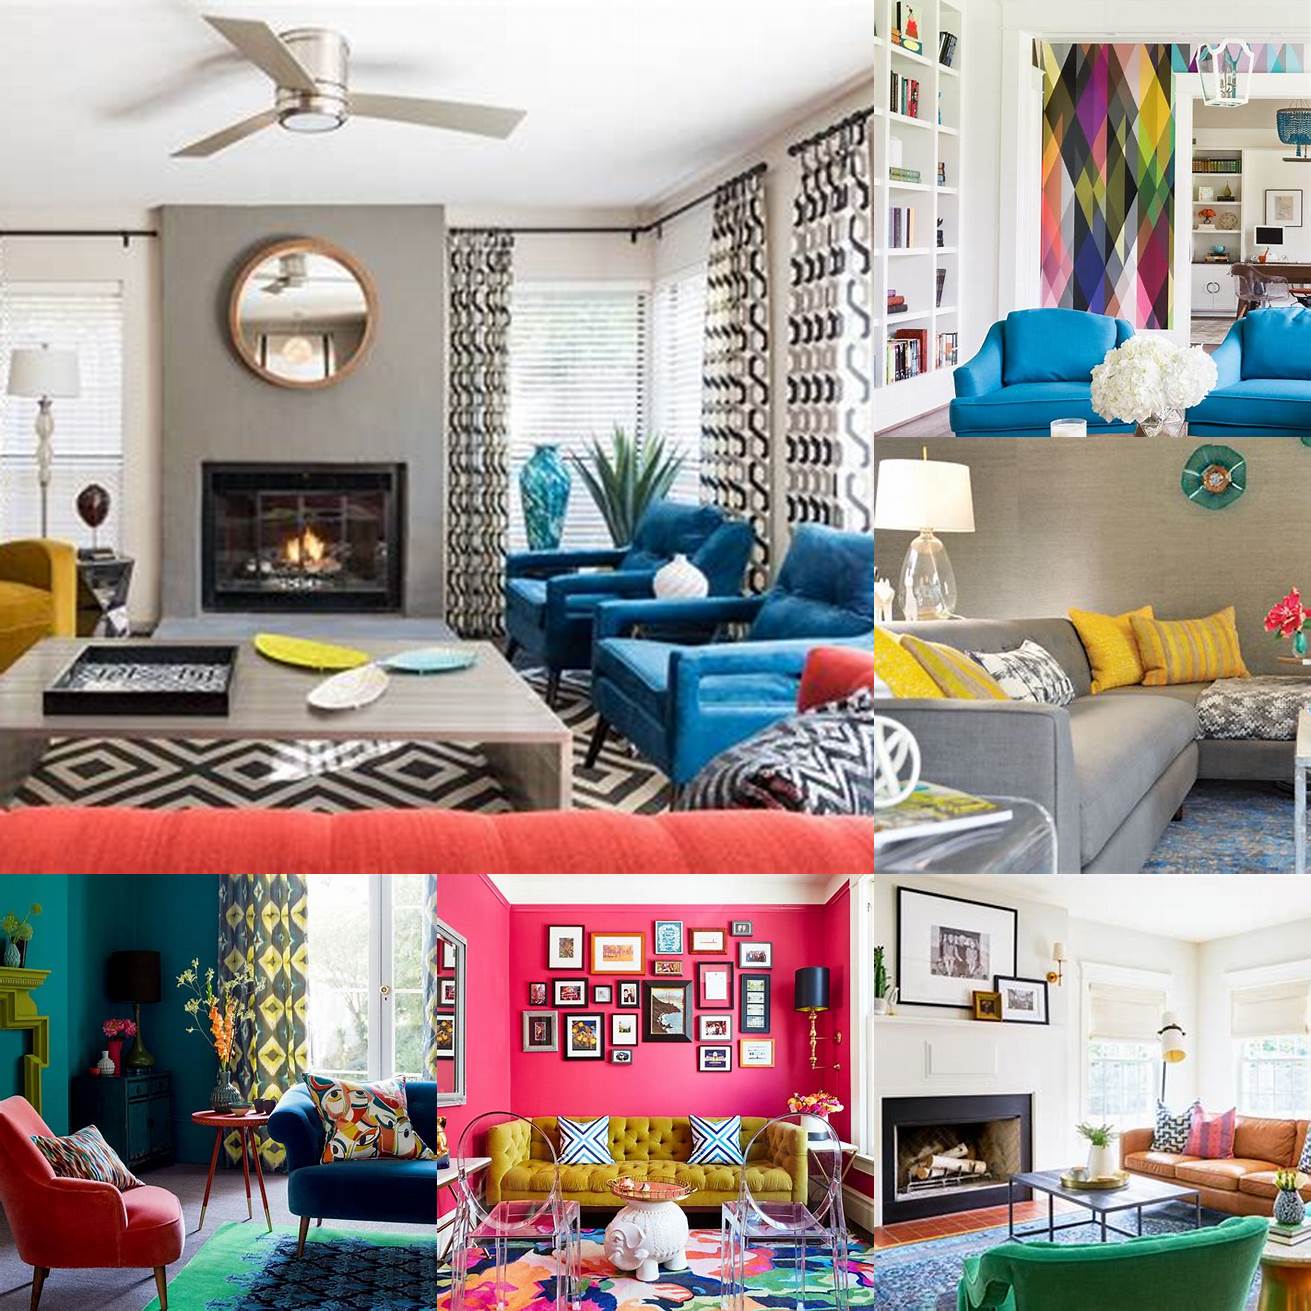 Bold colors and patterns add a pop of color to your space